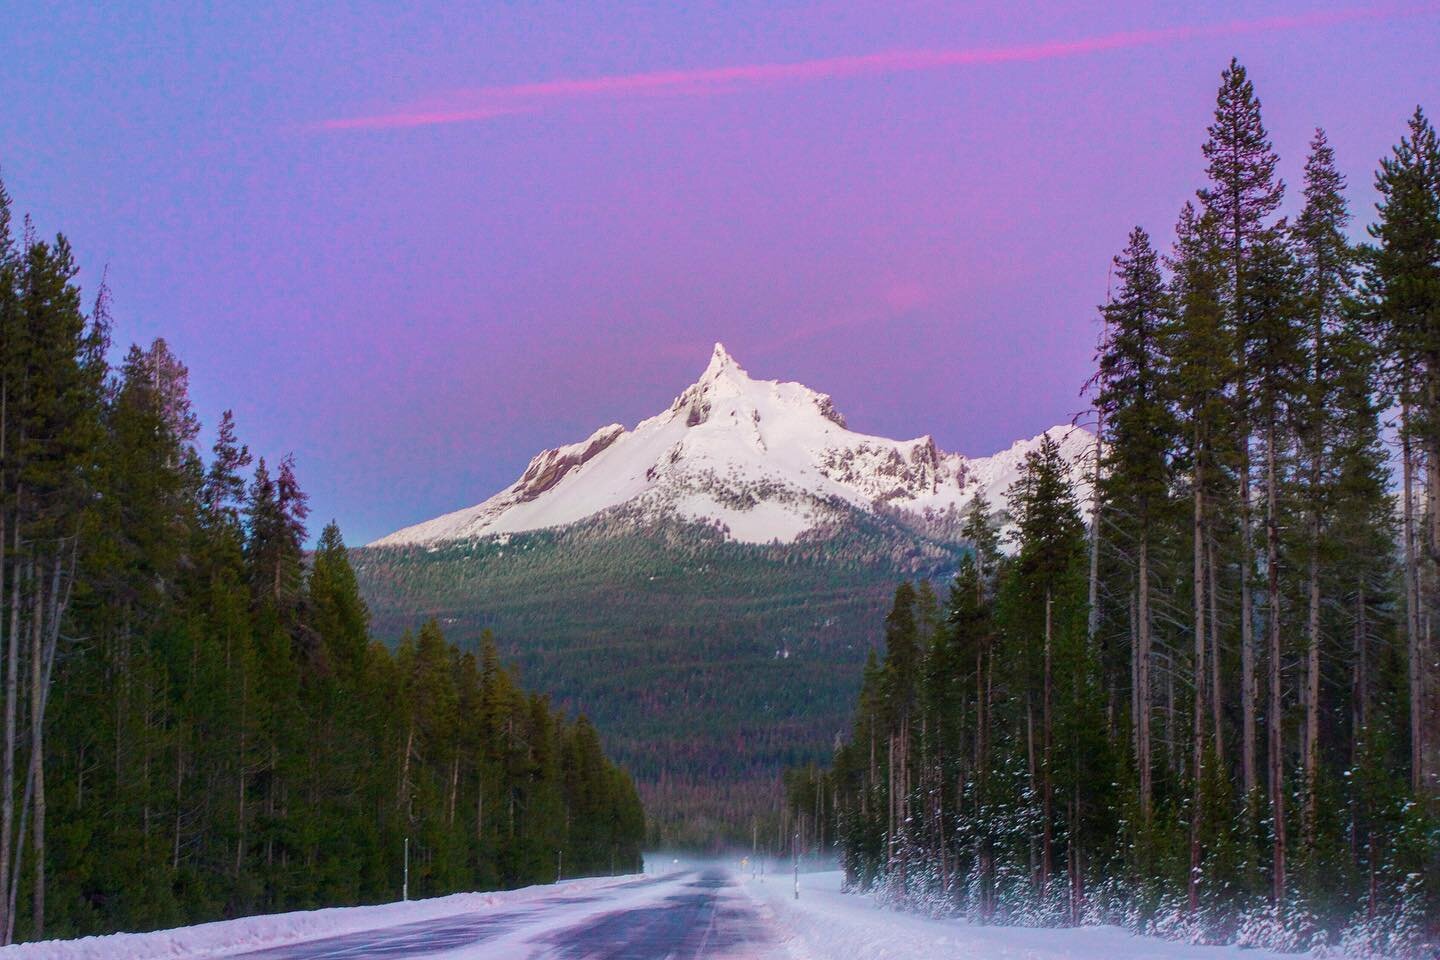 Even the highways are beautiful here 😍 Shot on our way home from Crater Lake NP. Can you name that peak? (I had never seen or heard of it before this trip!) 

#snowsoutwest #oregonexplored #pnwonderland #centraloregon